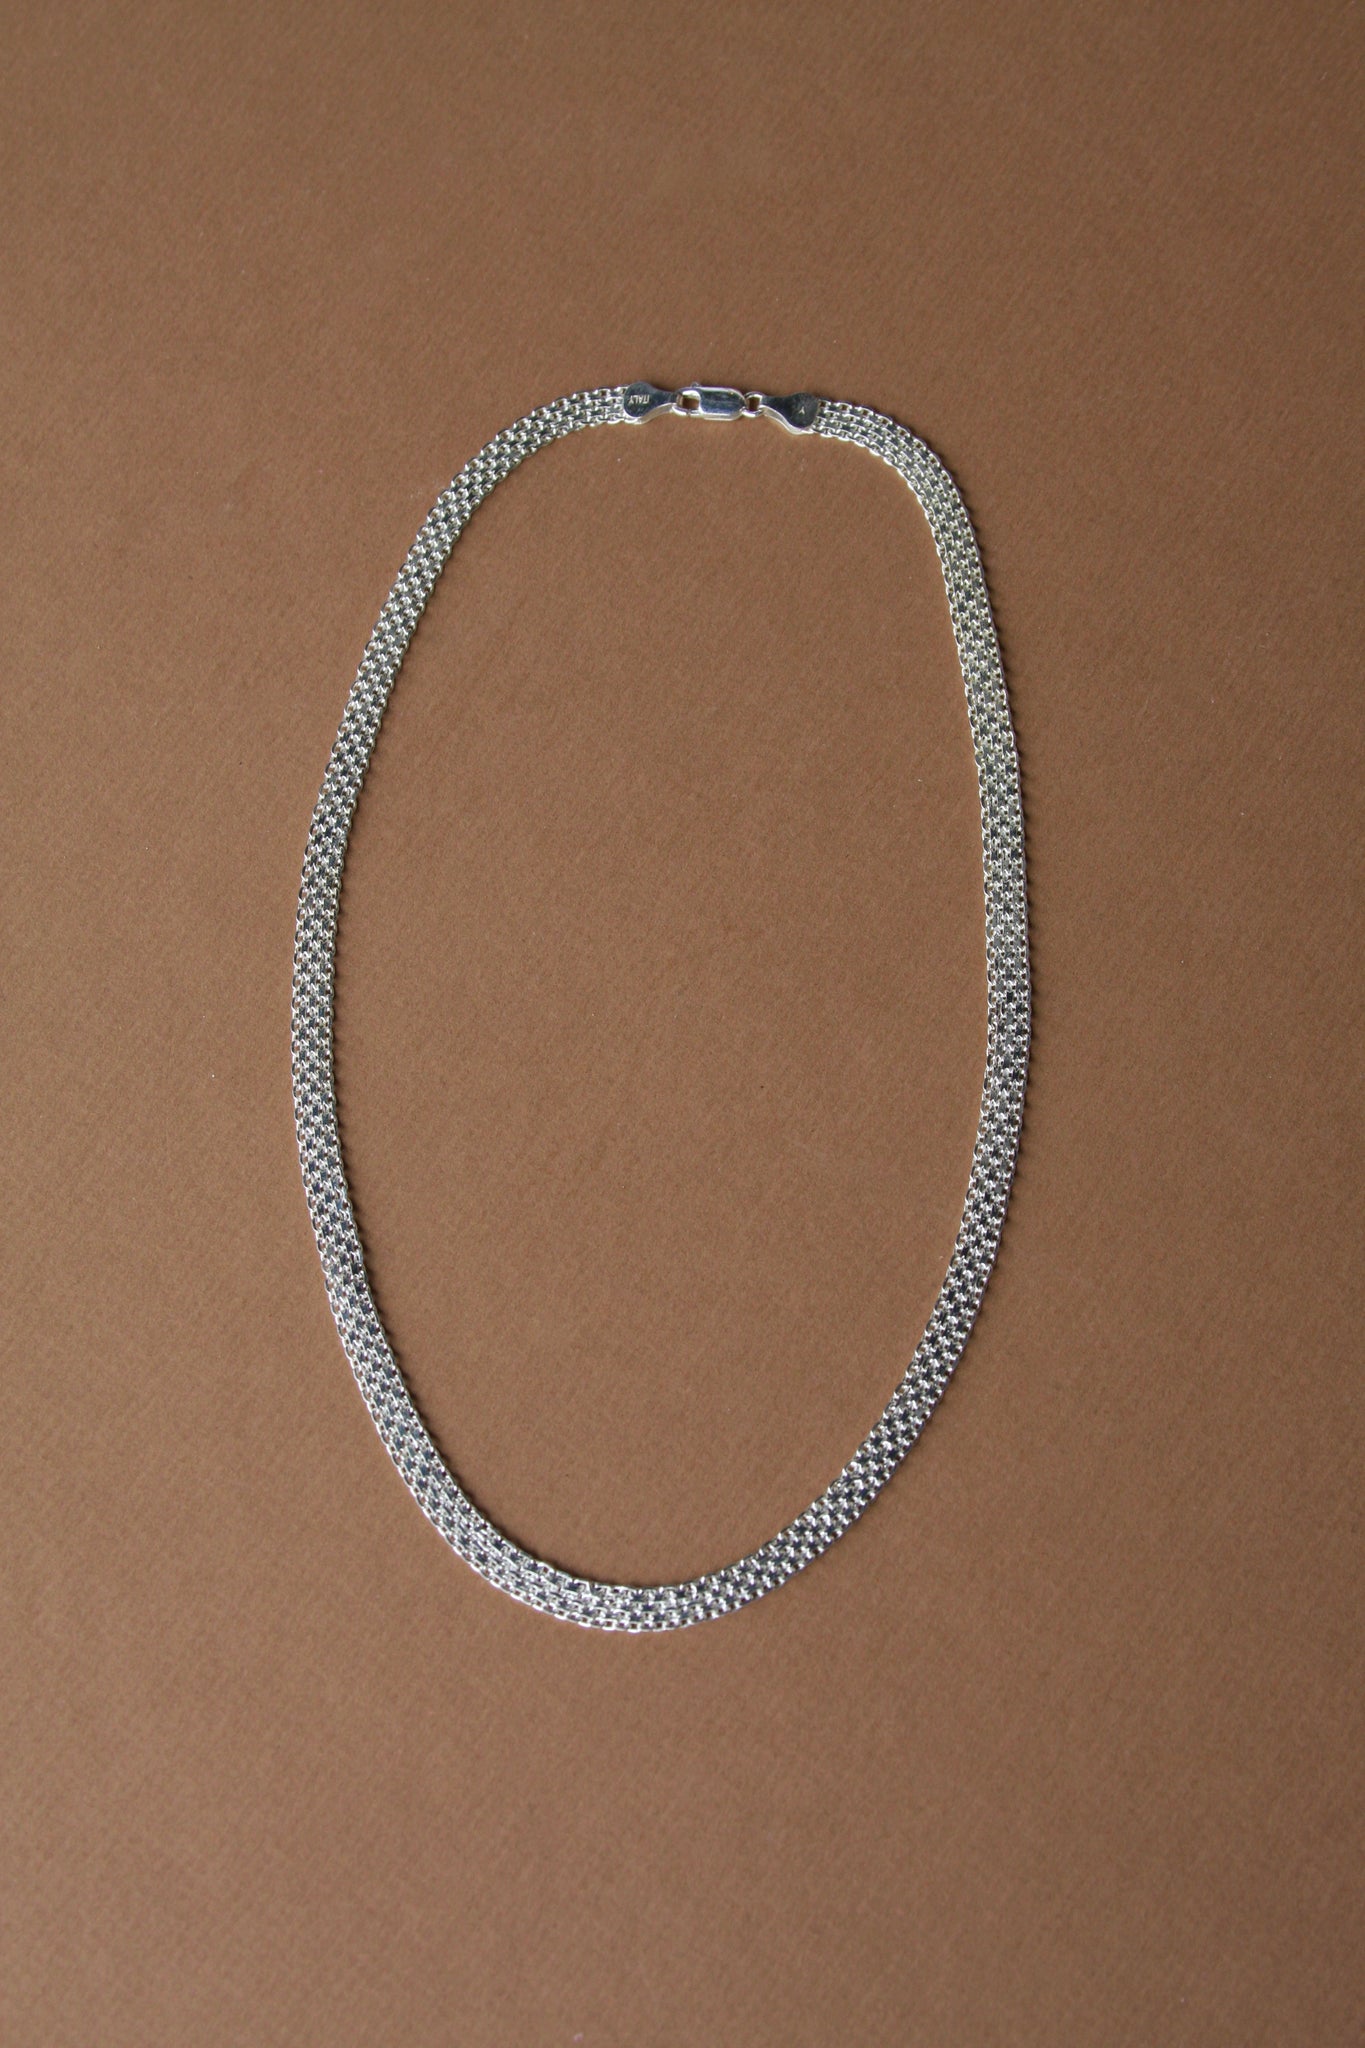 Vintage Sterling Silver Collar Necklace - Made In Italy